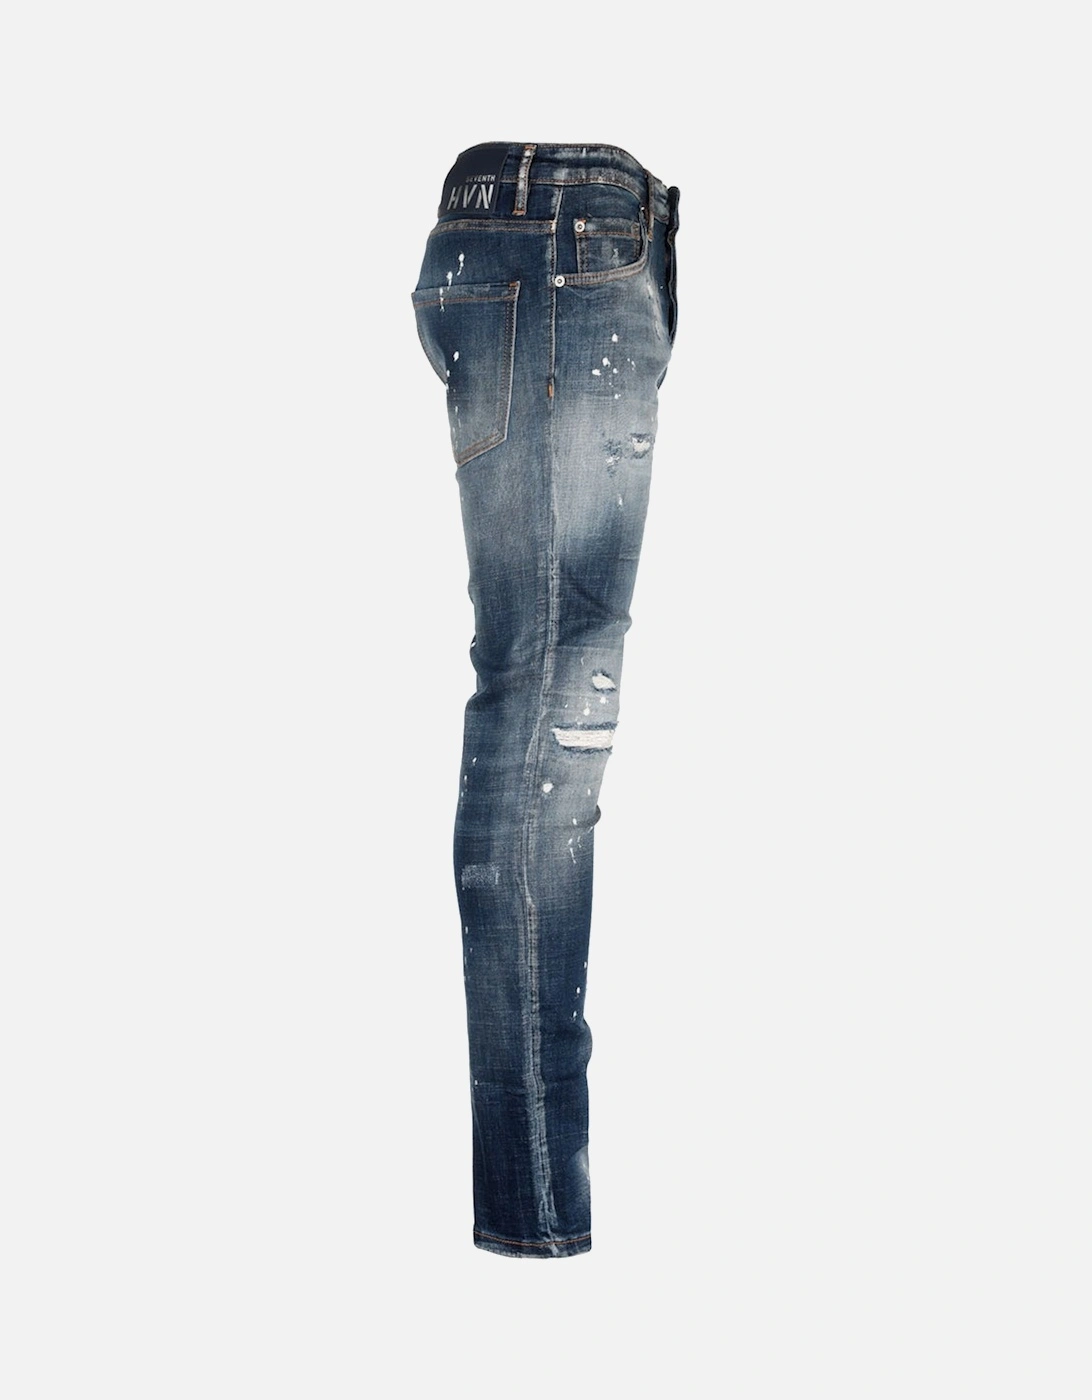 Fly Rider Distressed Jeans Stonewash